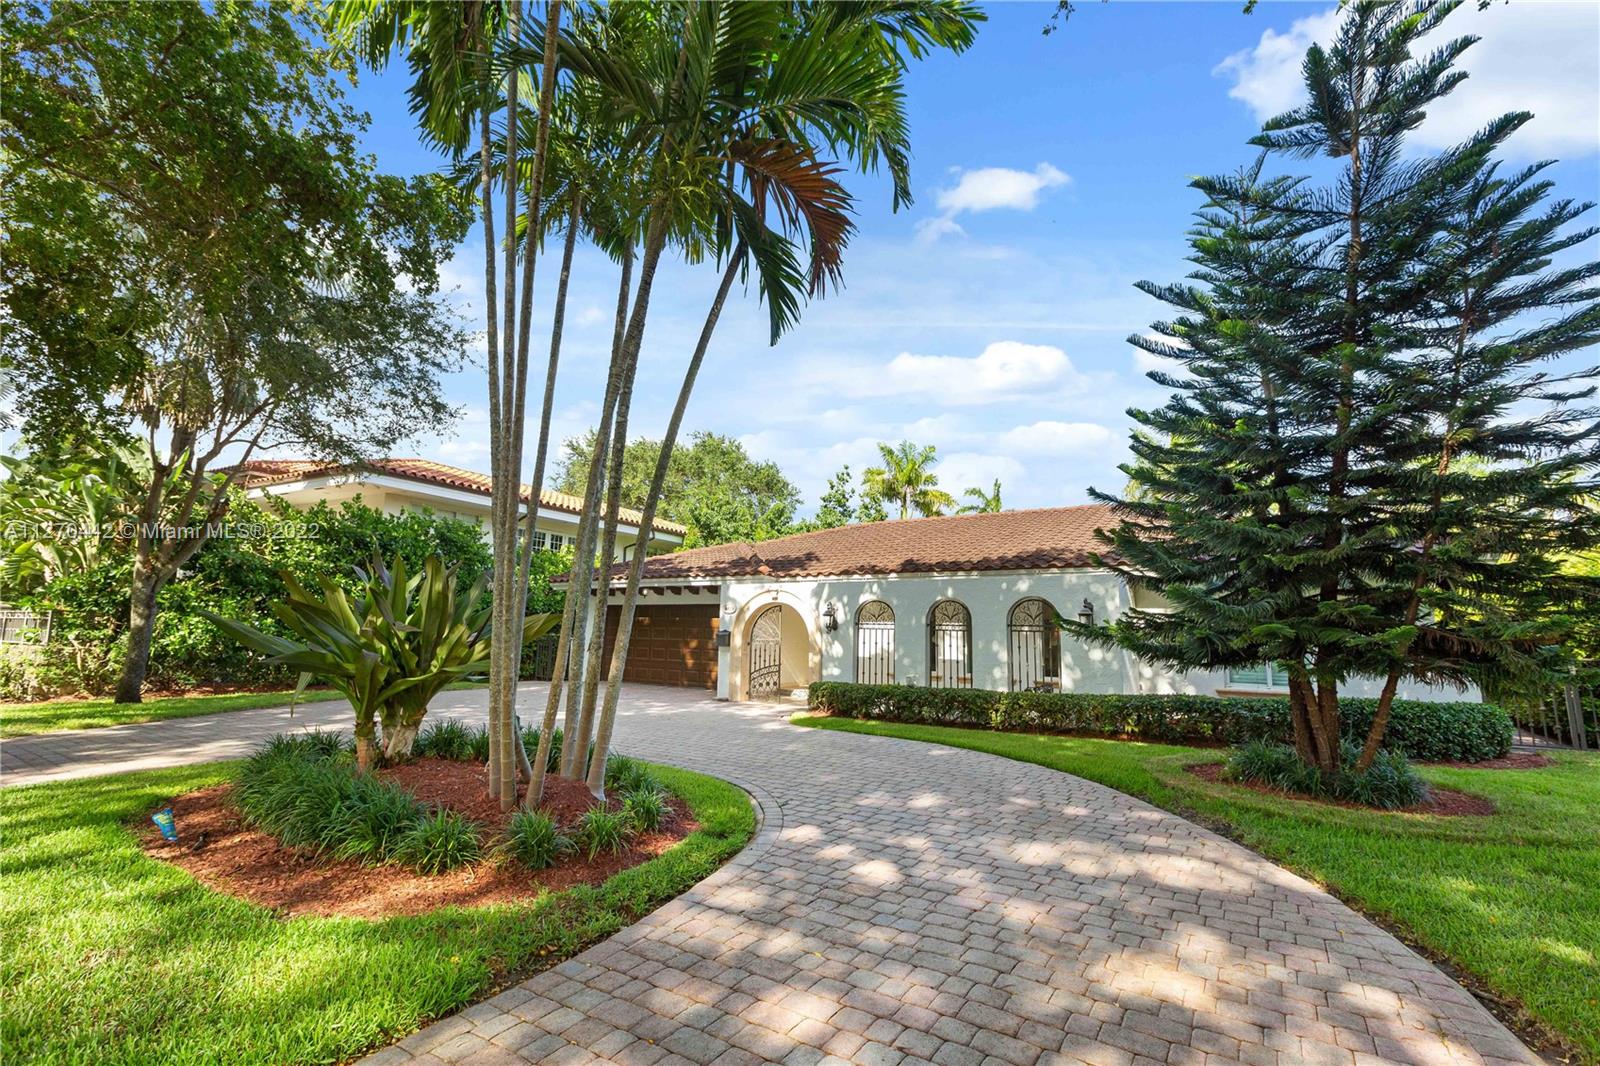 Beautiful and Classic Coral Gables home on one of the most beautiful Oak lined streets in the neighborhood.  This impeccable home offers a split plan a kitchen that is open to the Family room, wood, and marble floors as well as a large, elegant living room.  It has an indoor laundry room, two car garage and lovely foyer and gate.  It has impact windows and doors, as well as a beautiful pool and patio for entertaining.  This is a forever home in an amazing location and it’s priced to sell.